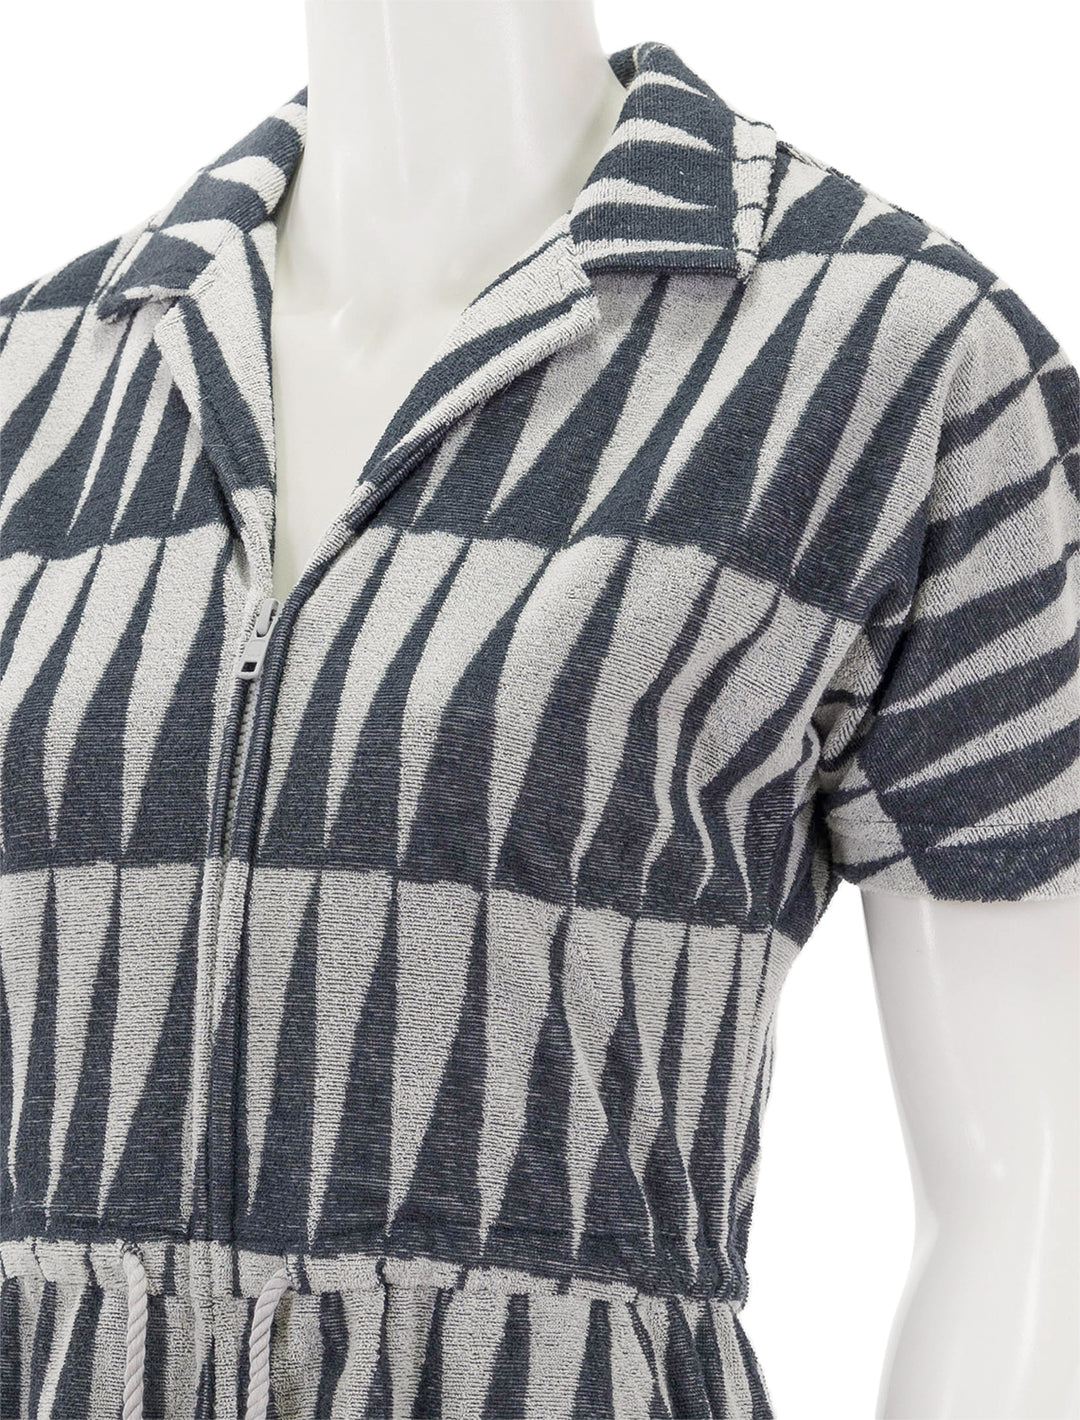 Close-up view of Marine Layer's terry out romper in black and white geo triangle.